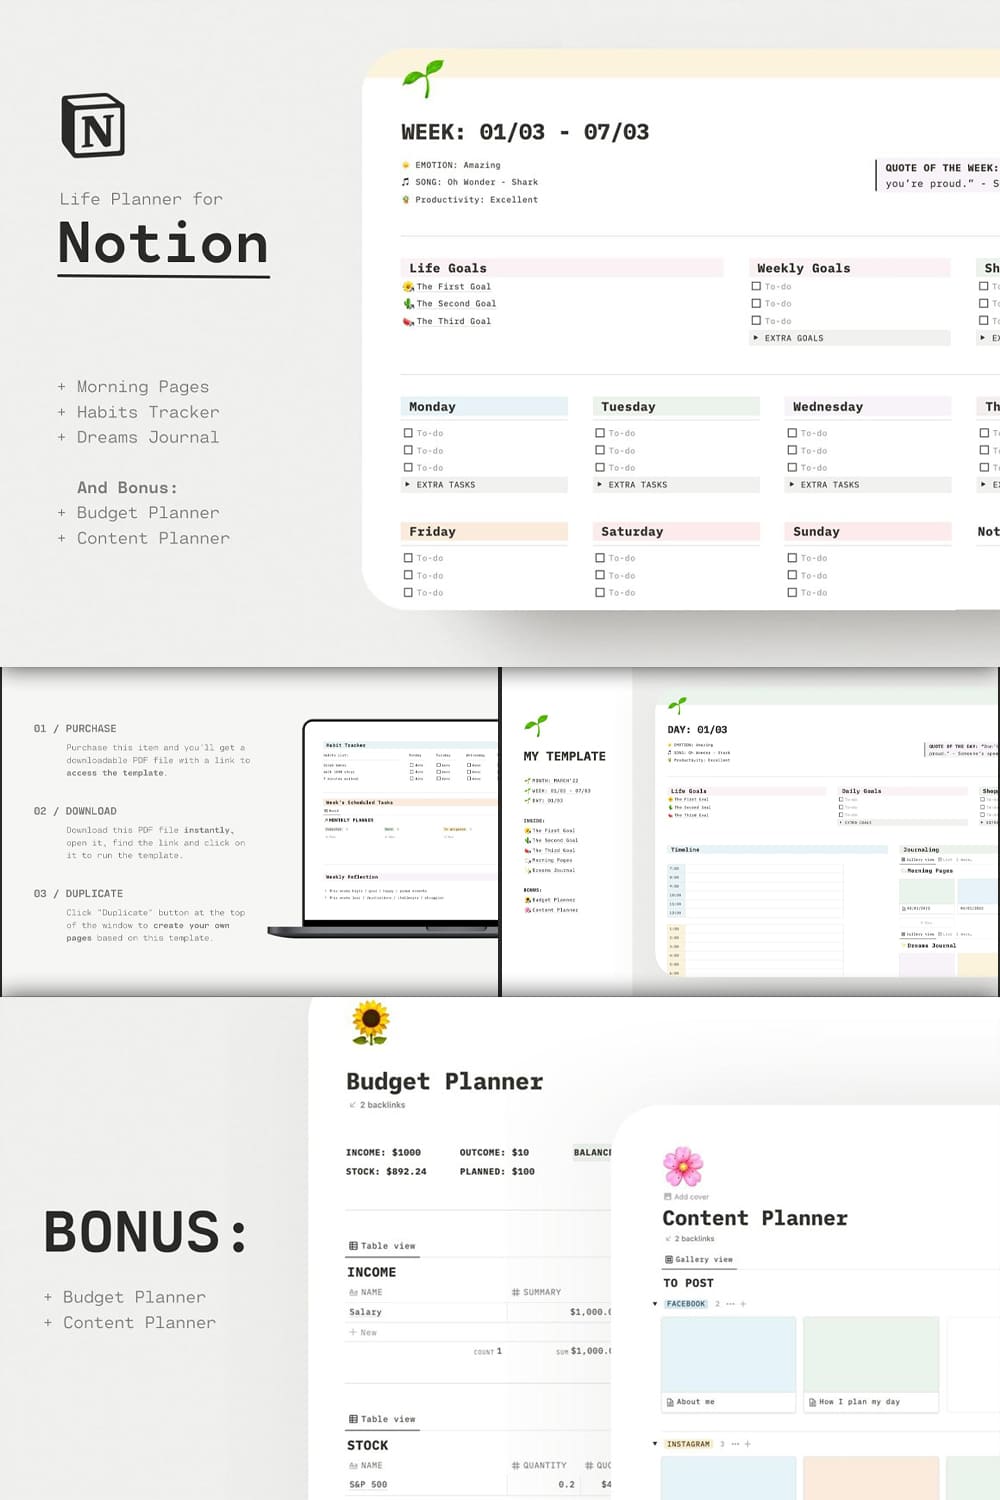 Lifestyle Planner / Notion Template pinterest image.